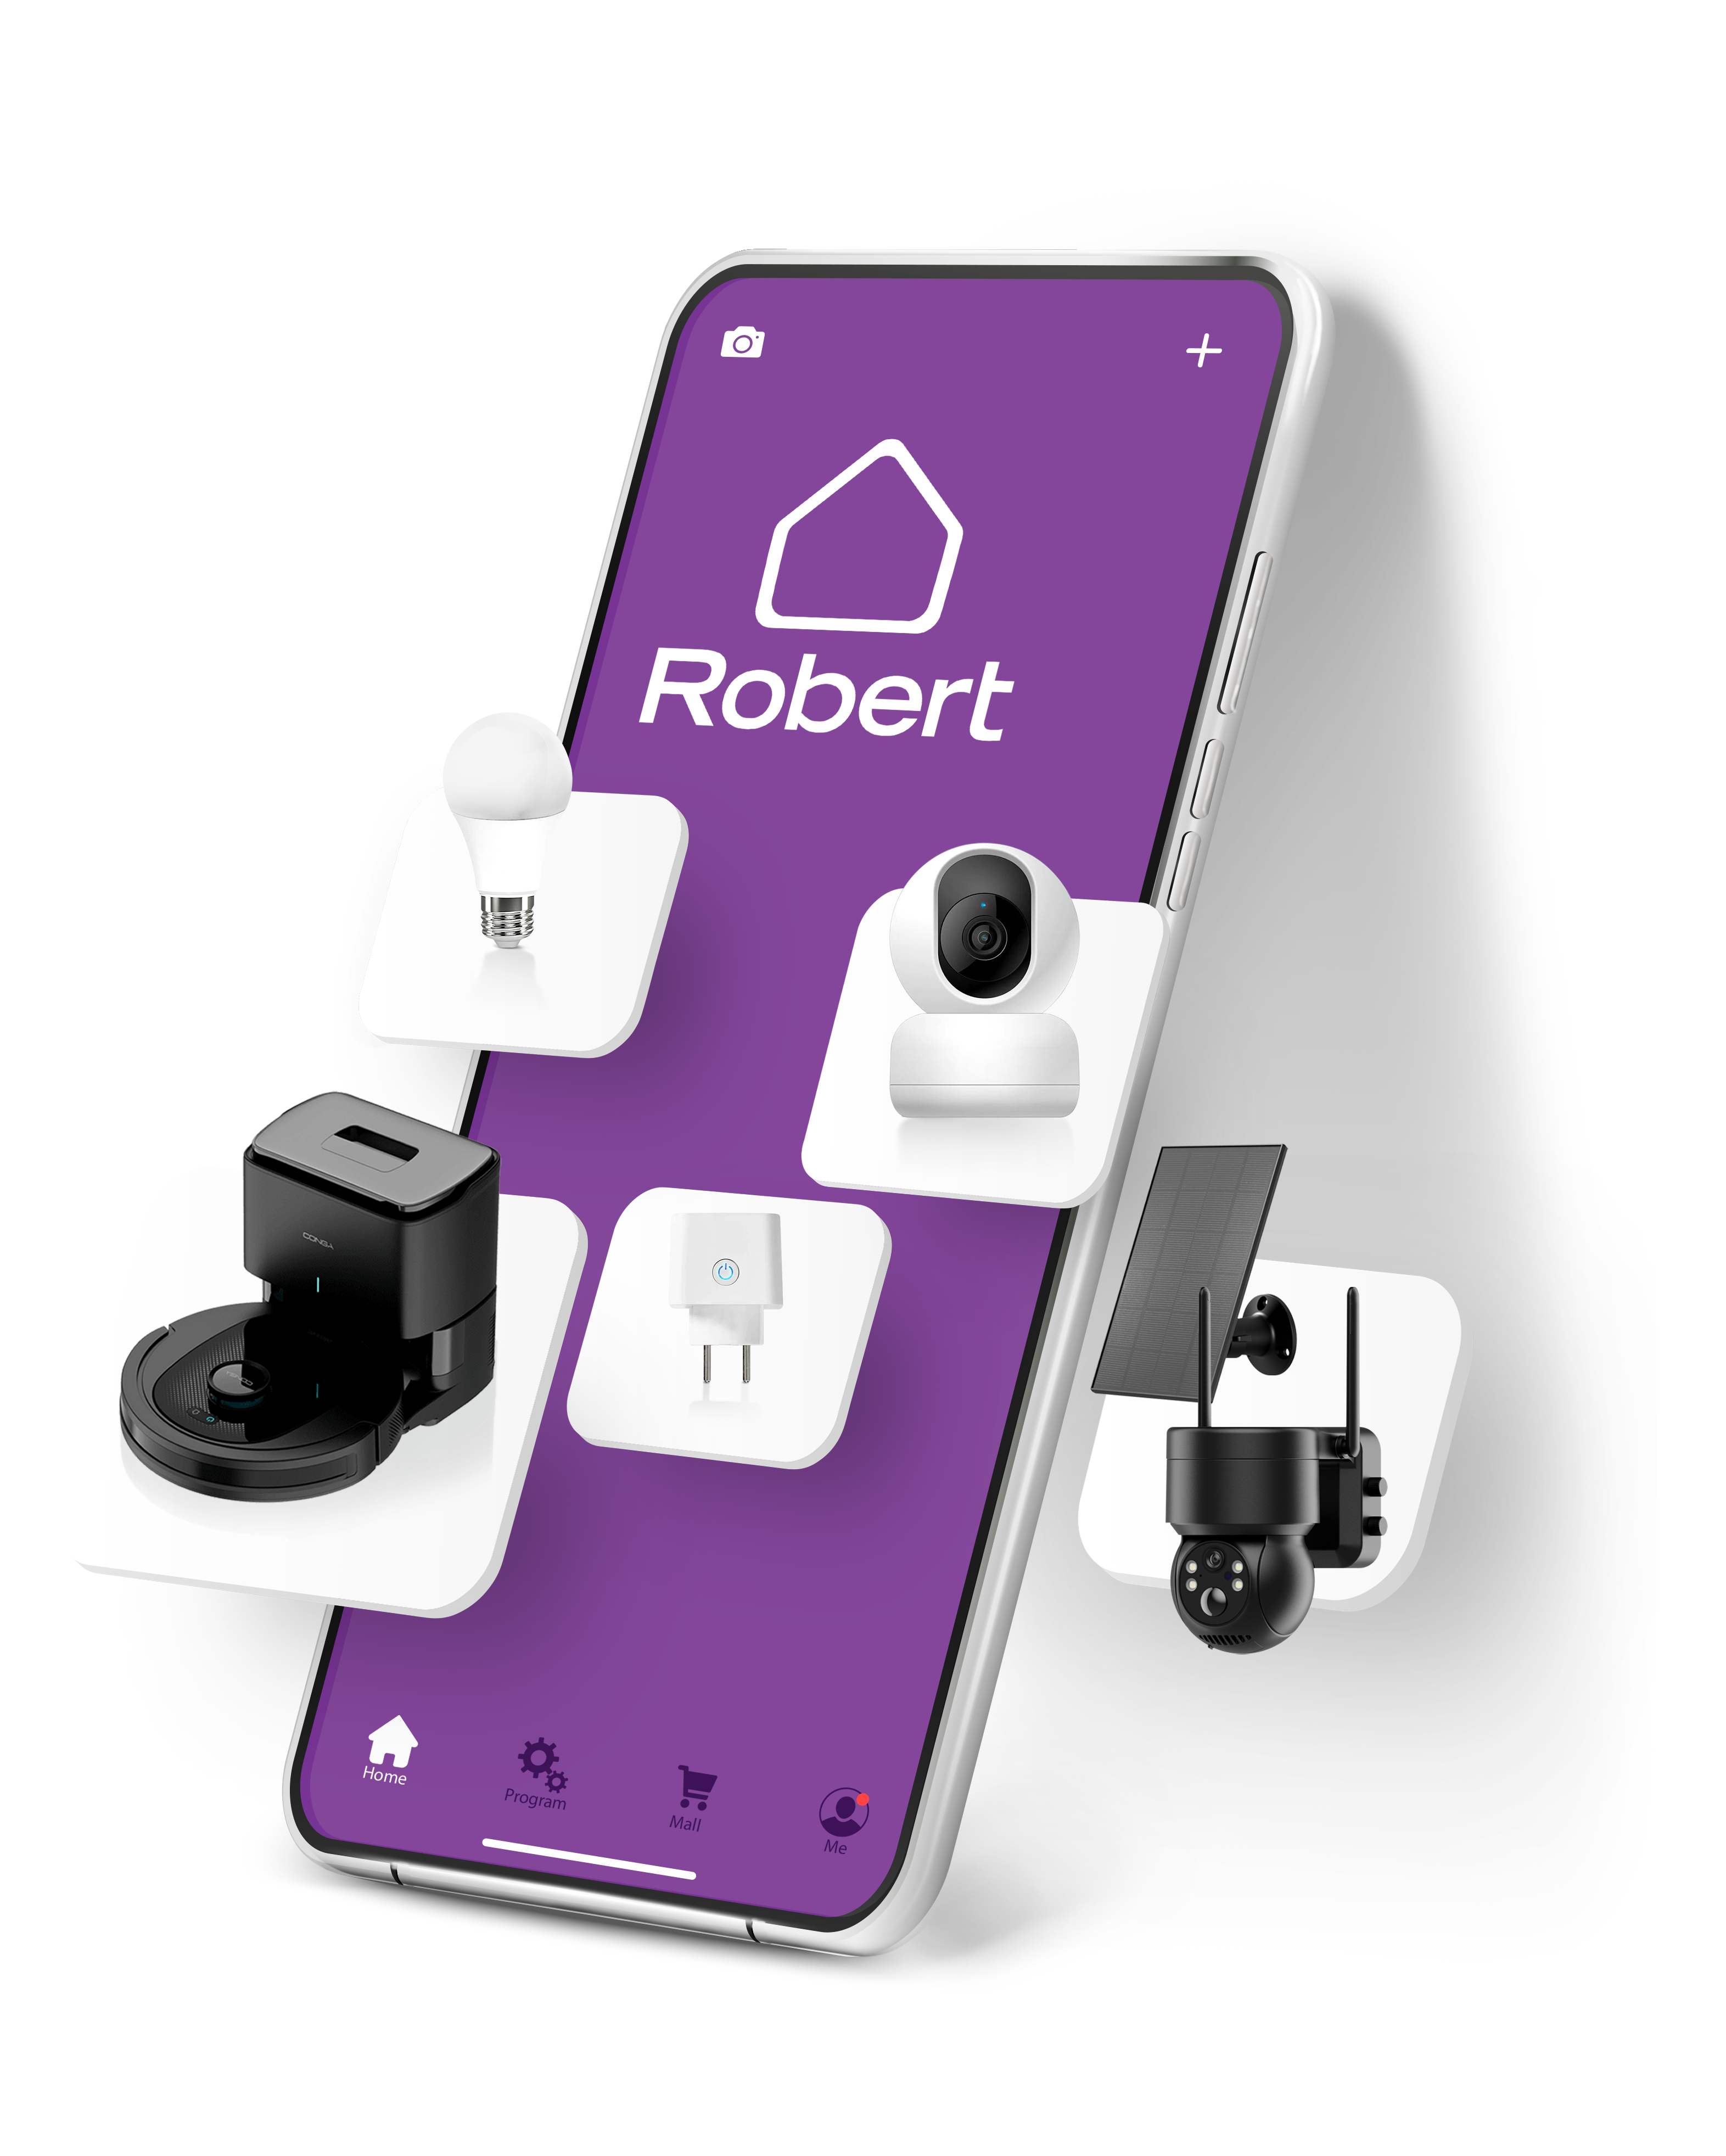 Robert Smart App is solution to control all Tuya devices under one App.